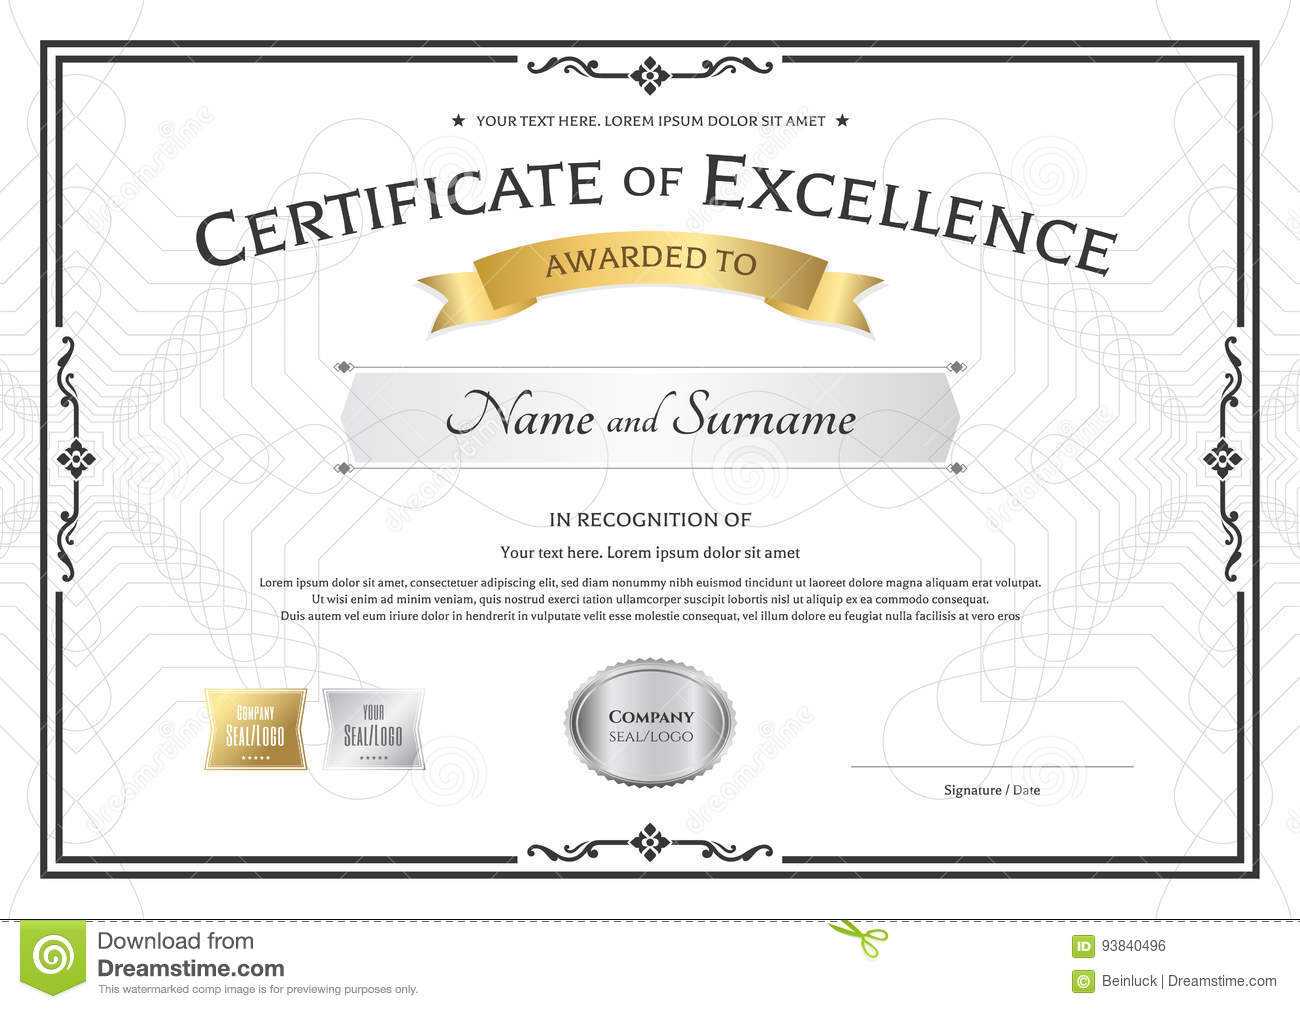 Certificate Of Excellence Template With Gold Award Ribbon On Intended For Certificate Of Excellence Template Free Download